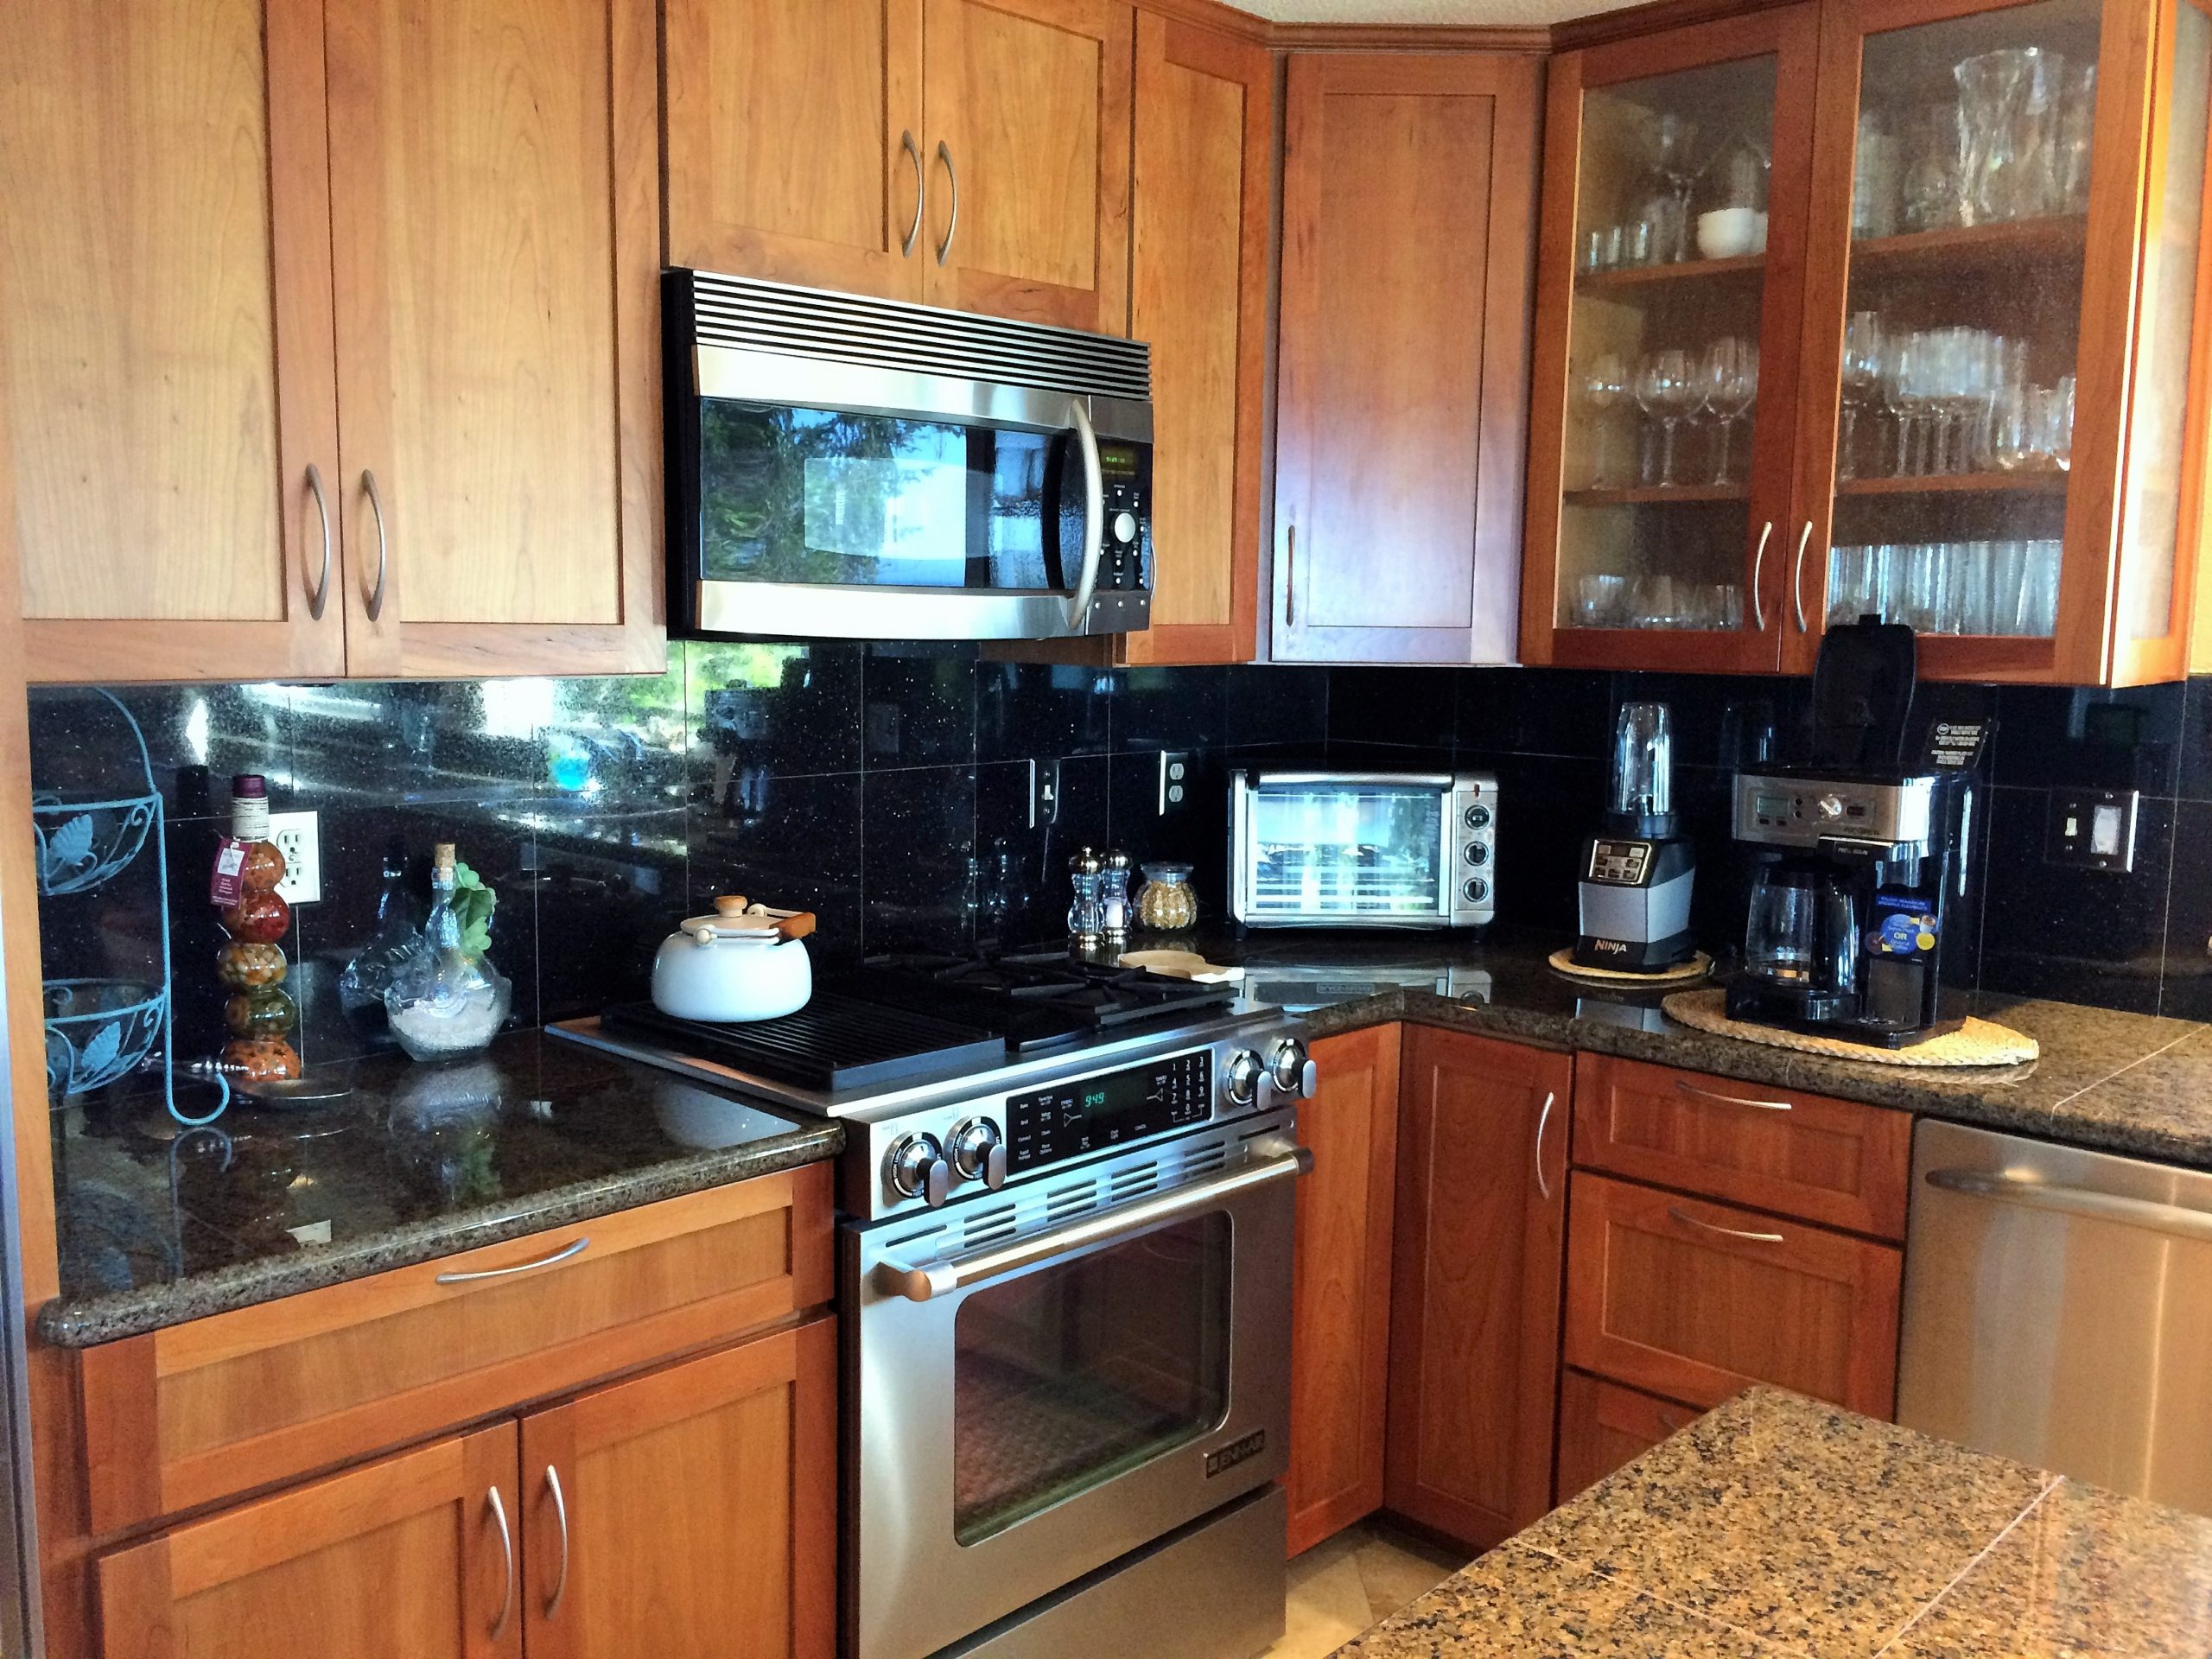 Photo of nicely appointed kitchen at Pacific Edge - Granite tile countertops and stainless steel appliances